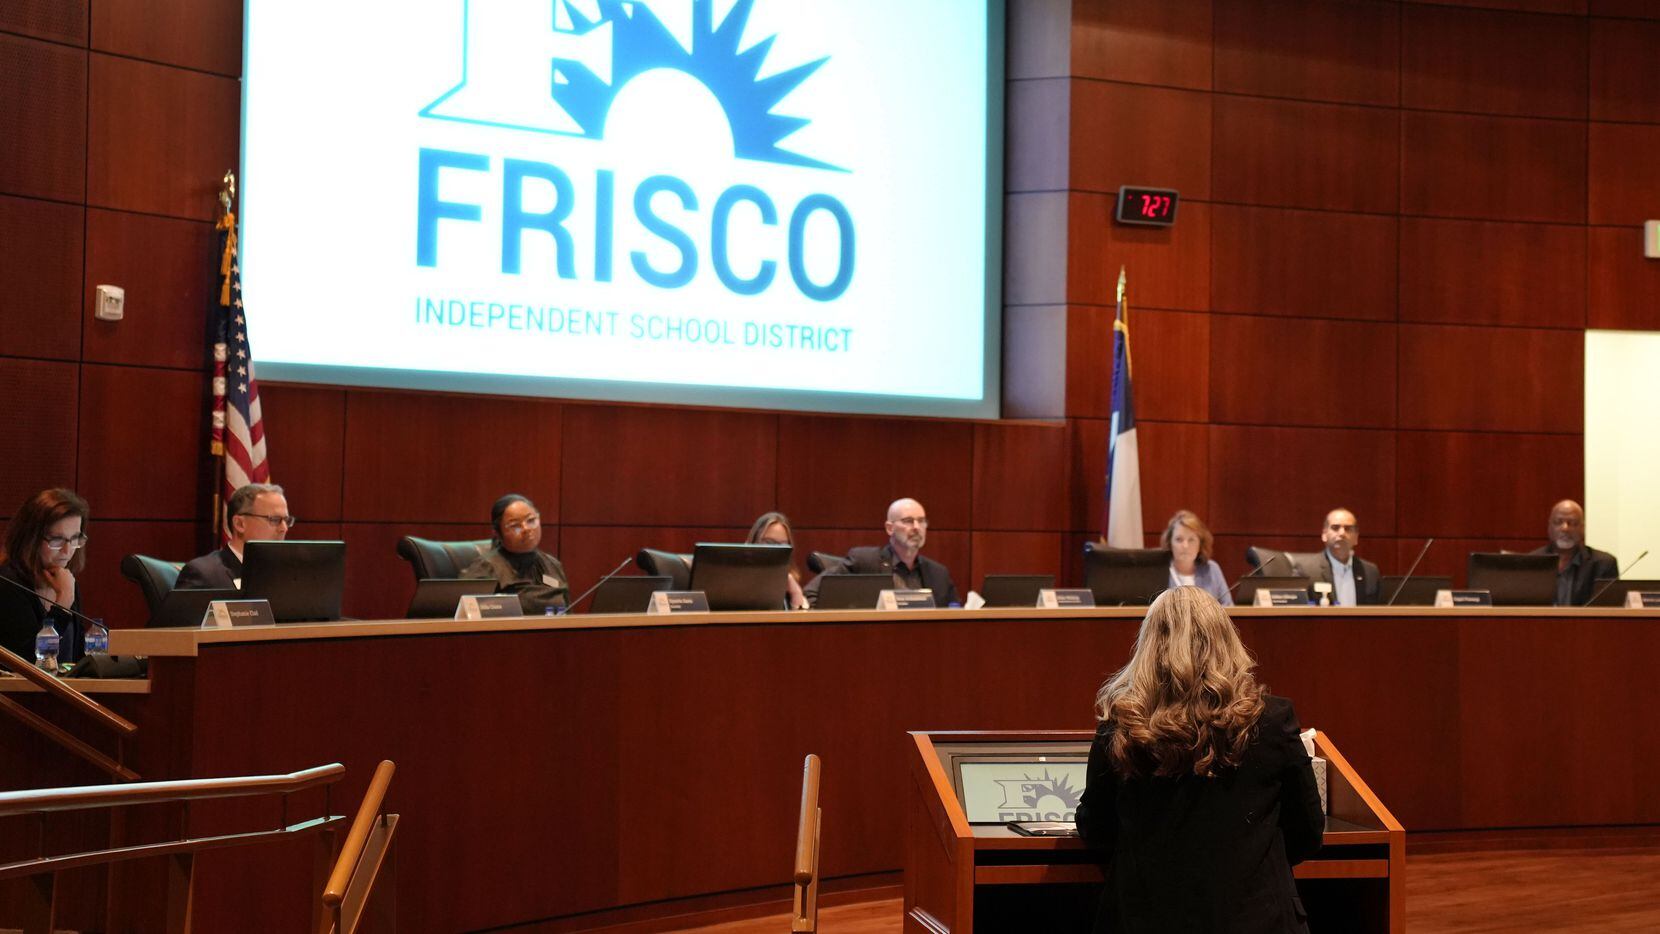 Amy Baker speaks on behalf of a family friend who has a transgender child in Frisco ISD...